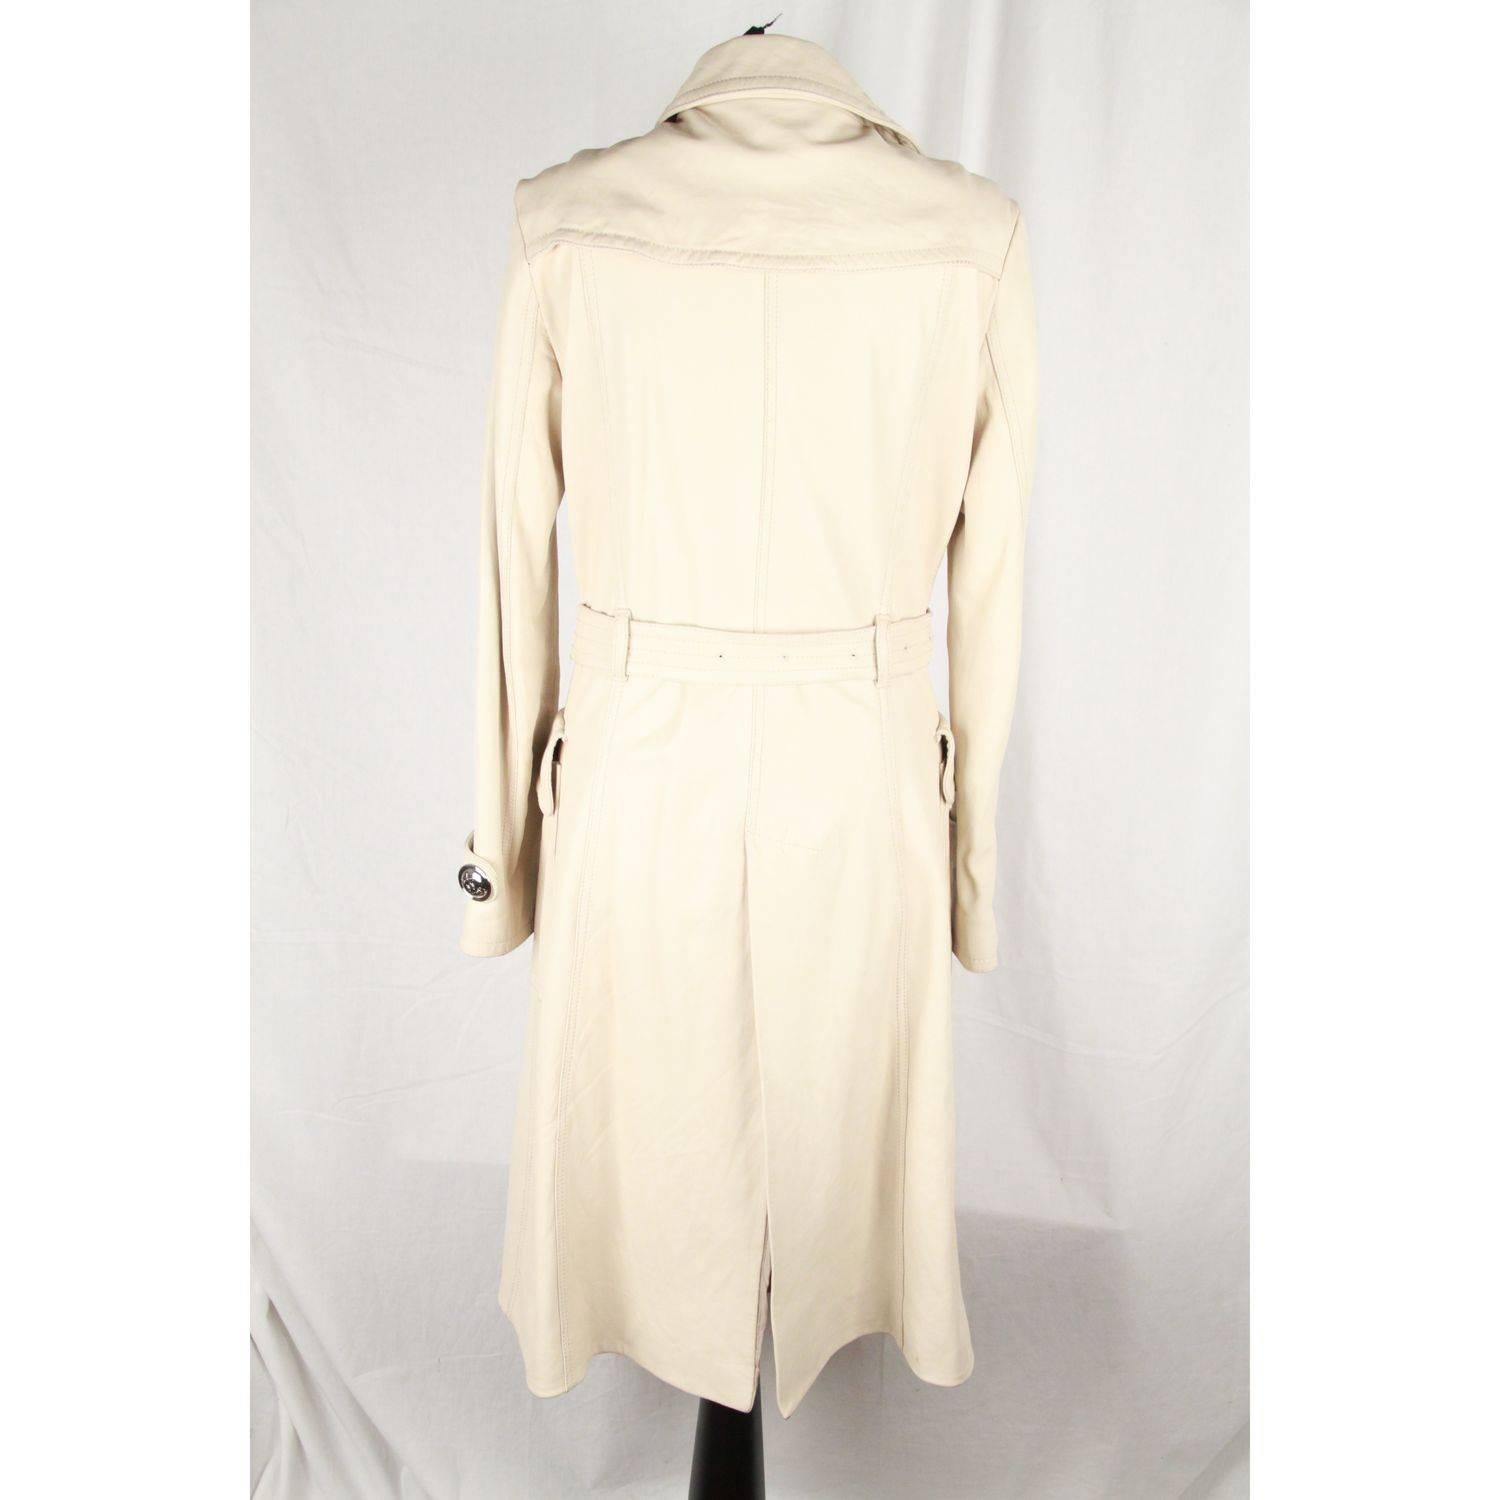 Women's BURBERRY Ivory Leather TRENCH COAT Double Breasted w/ BELT Size 42